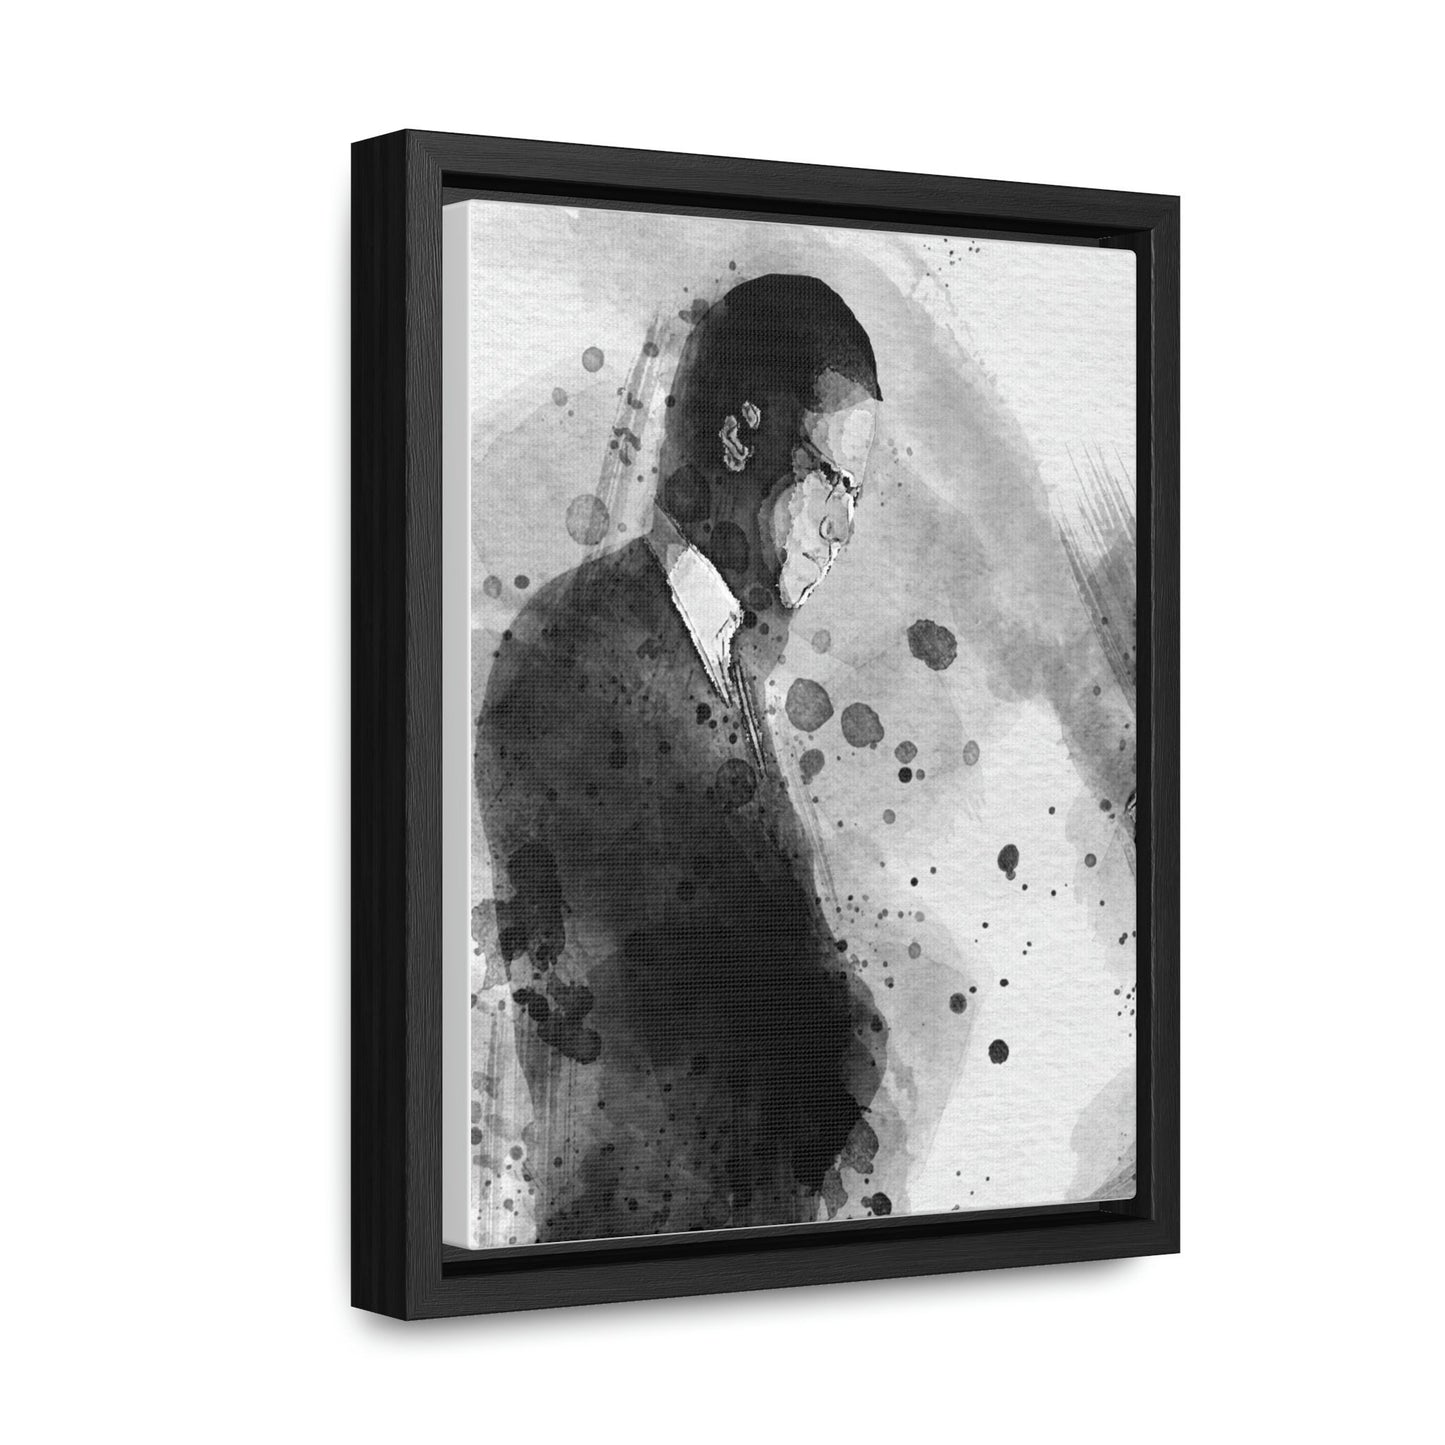 Malcolm X Poster, Canvas Wrap, Kids Room, Man Cave, Woman Cave, Game Room